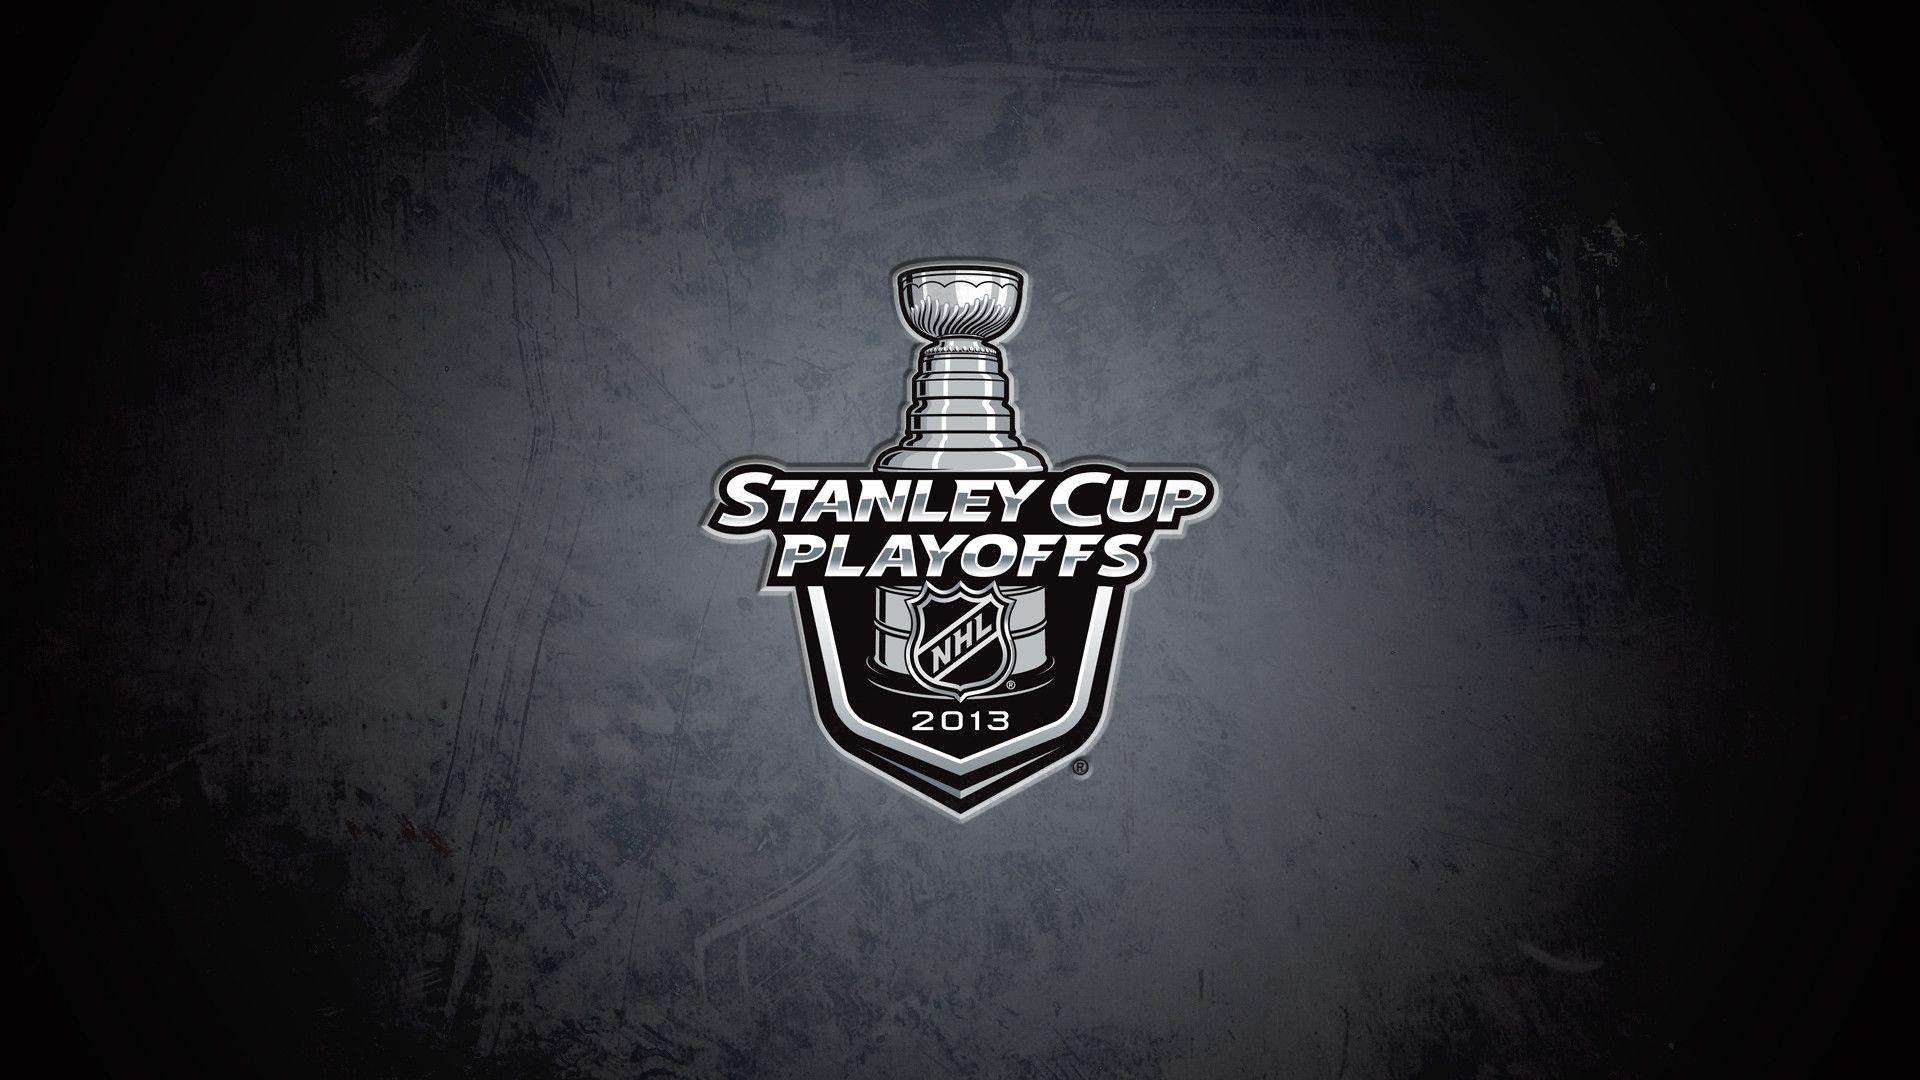 A simple wallpaper for the 2013 Stanley Cup Playoffs (1920x1080)